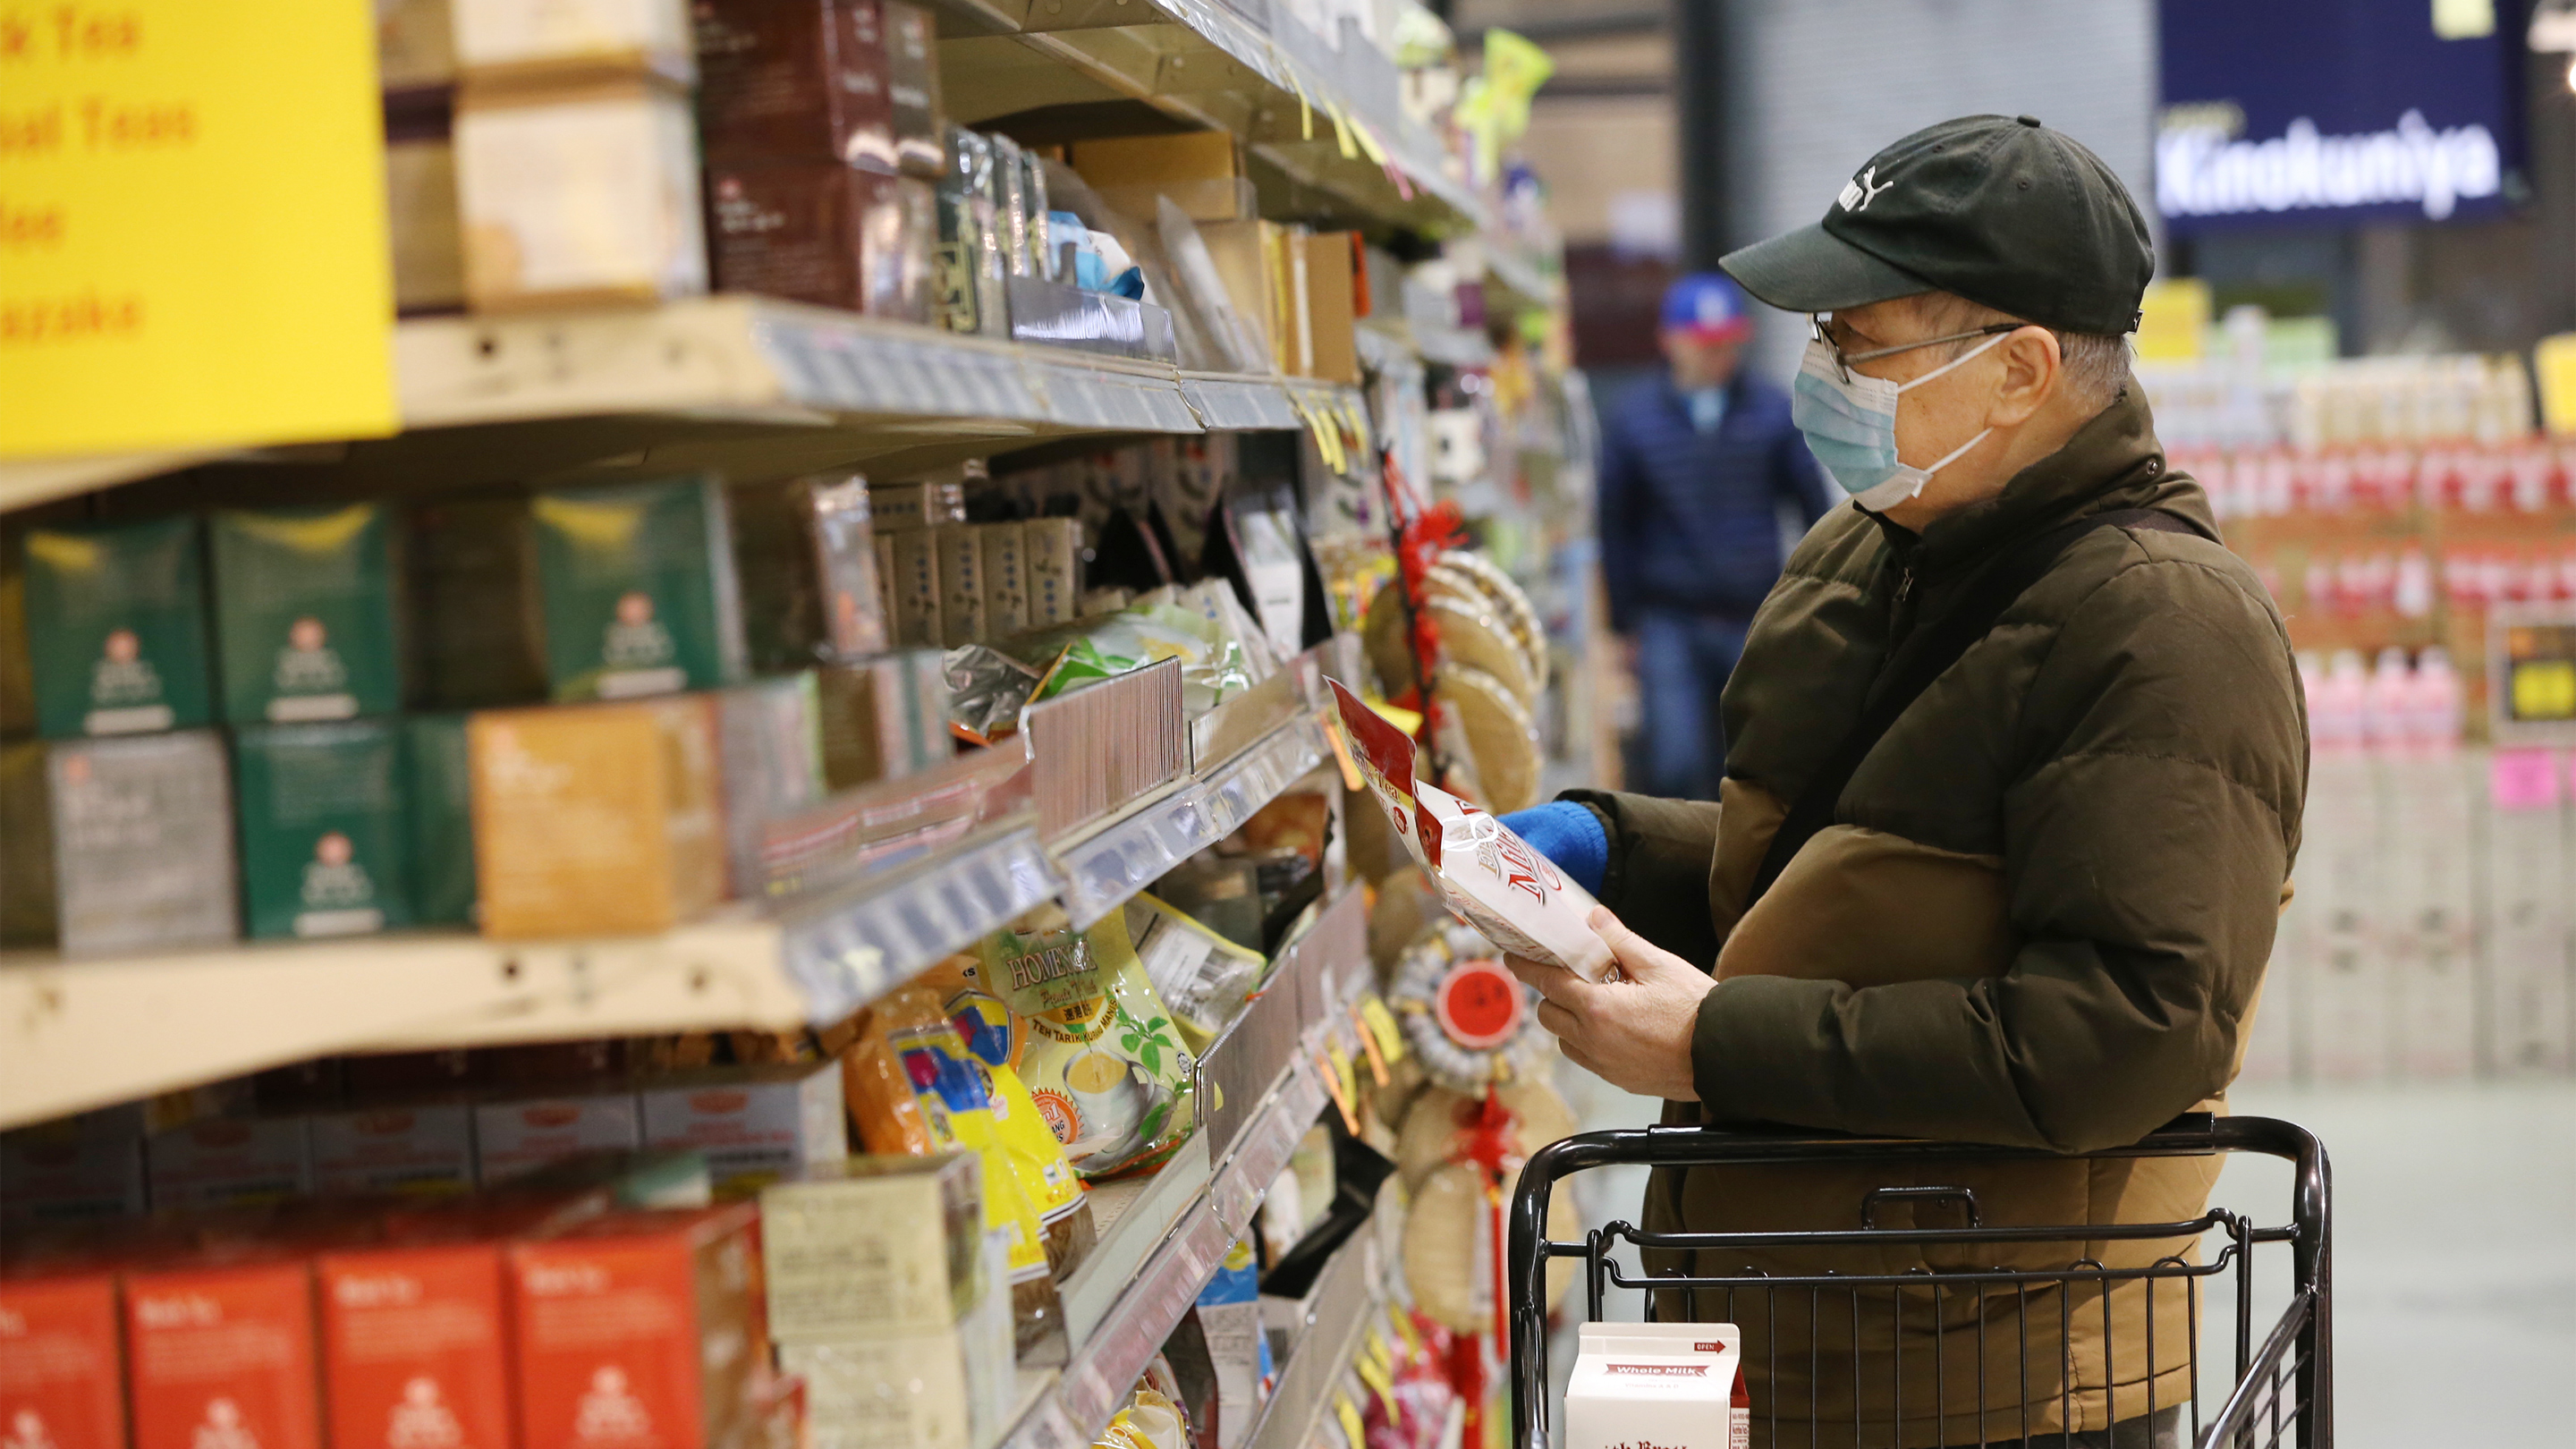 Pandemic economy changing how Americans buy groceries - Marketplace